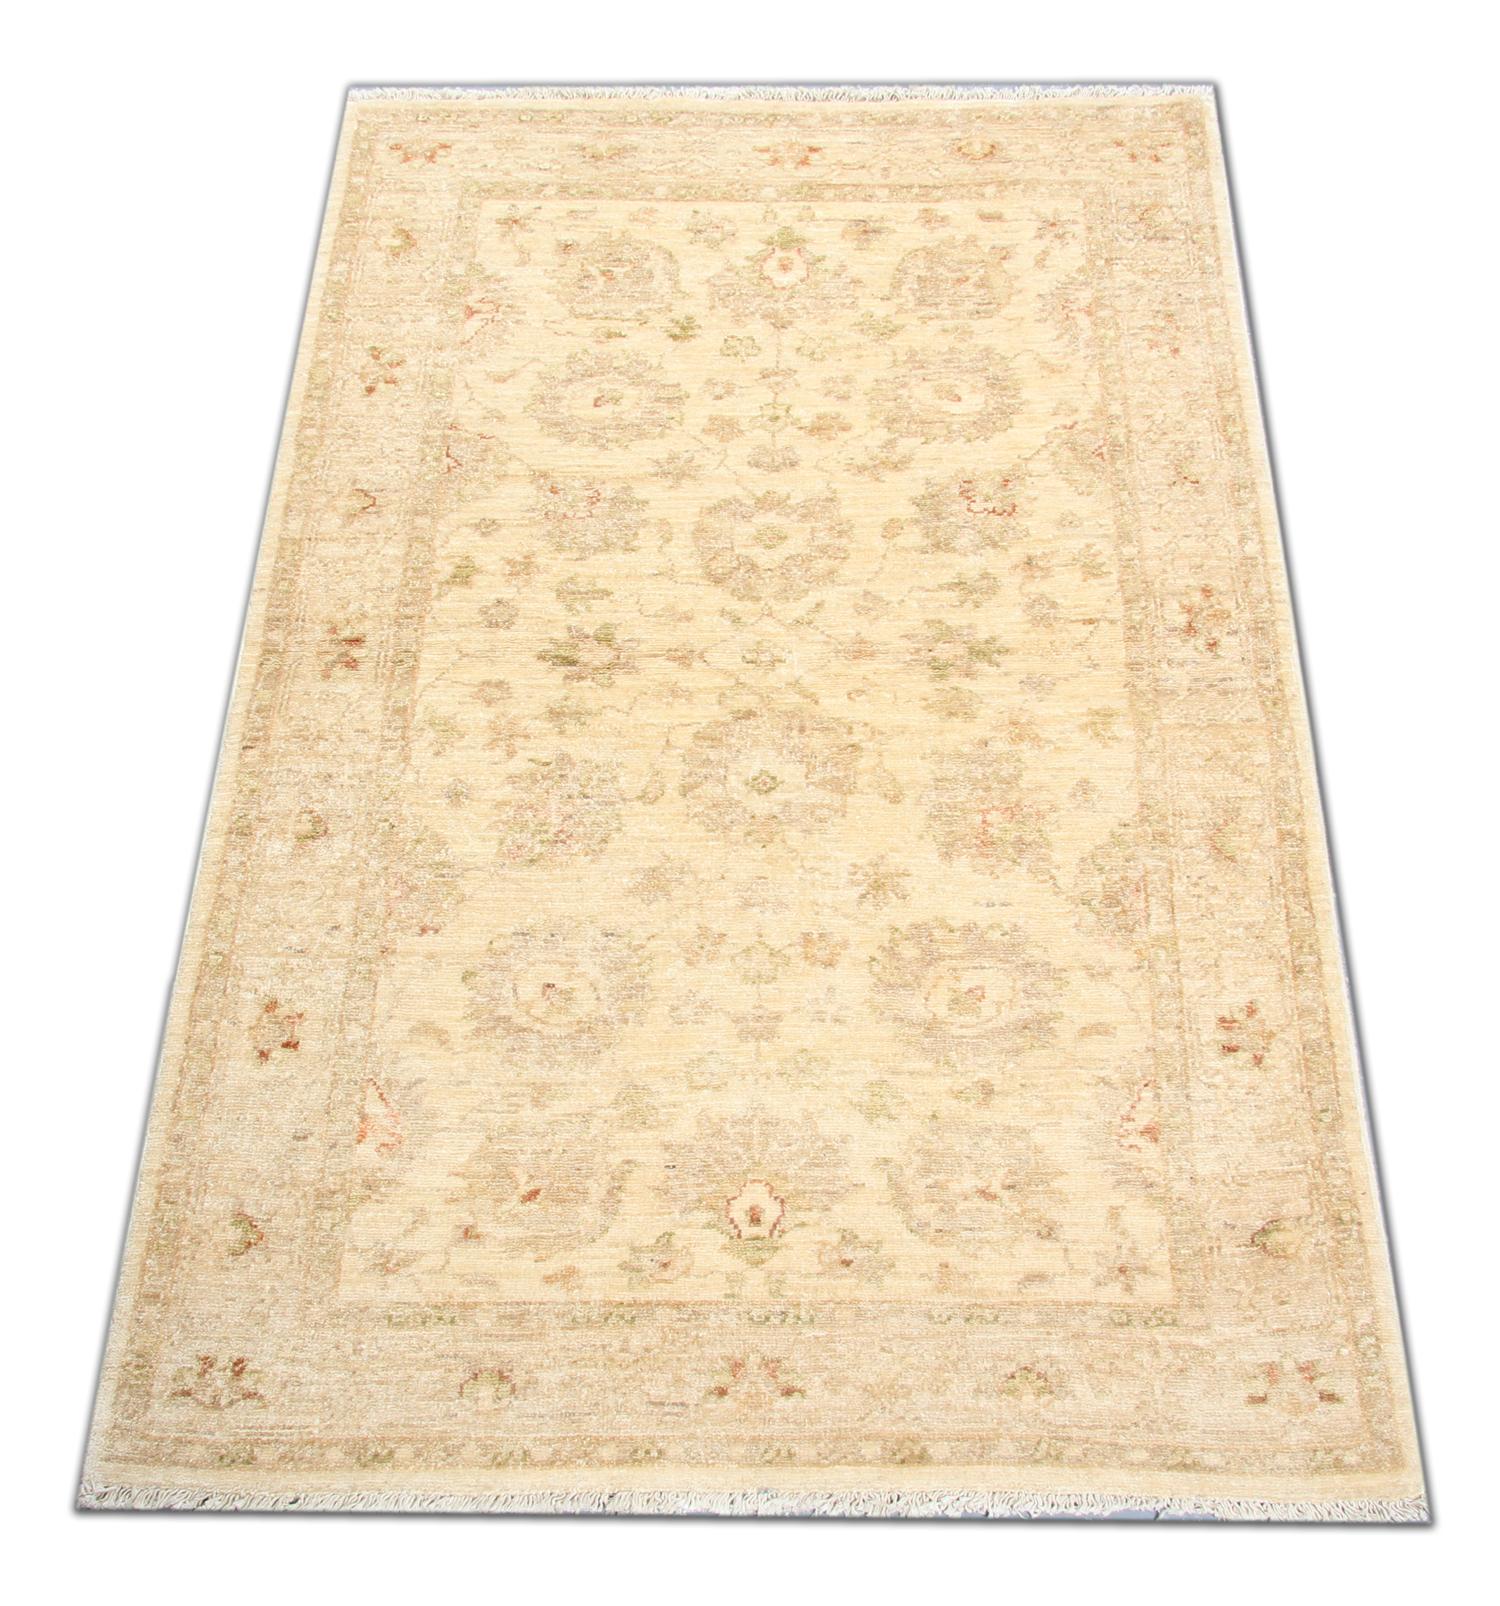 This traditional Ziegler rug is one of our more luxurious rugs made on looms by master weavers of Afghan rugs. This cream rug is made with or all handspun wool, with the colour coming from organic vegetable dyes. This carpet features an all-over